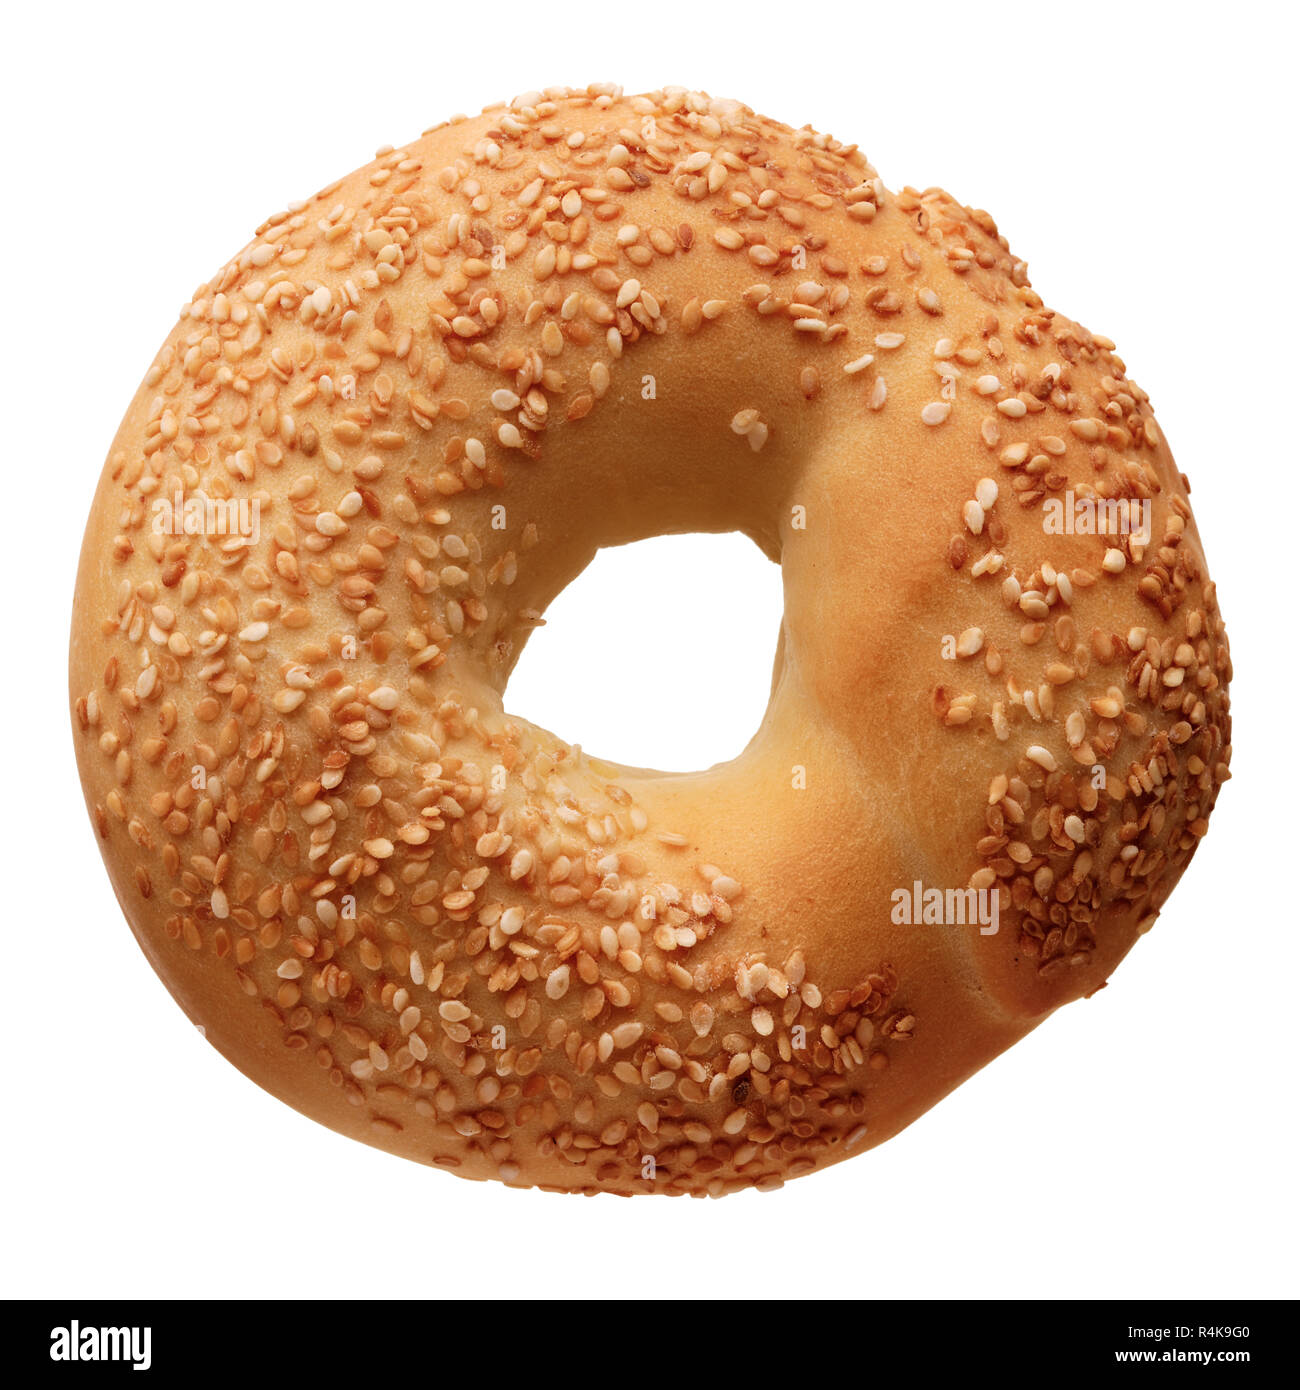 Food: single bagel with sesame seeds, isolated on white background Stock Photo